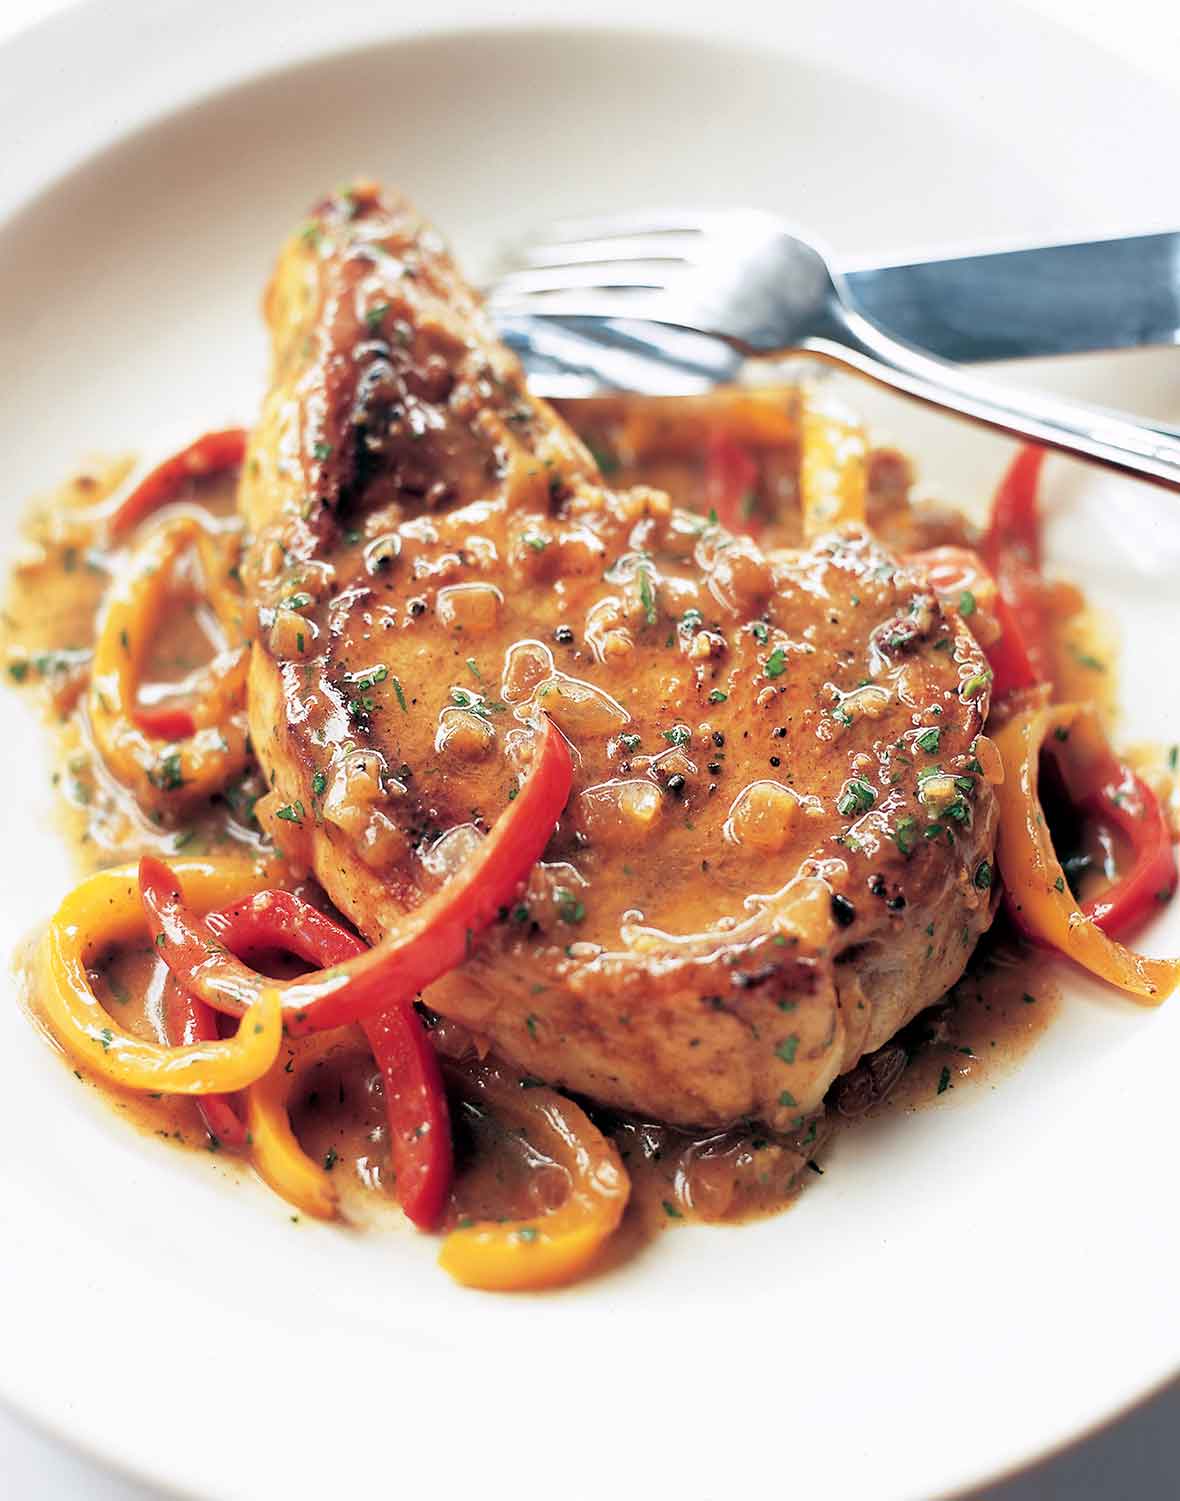 A pork chop with vinegar and sweet peppers on a white plate with a fork and knife.